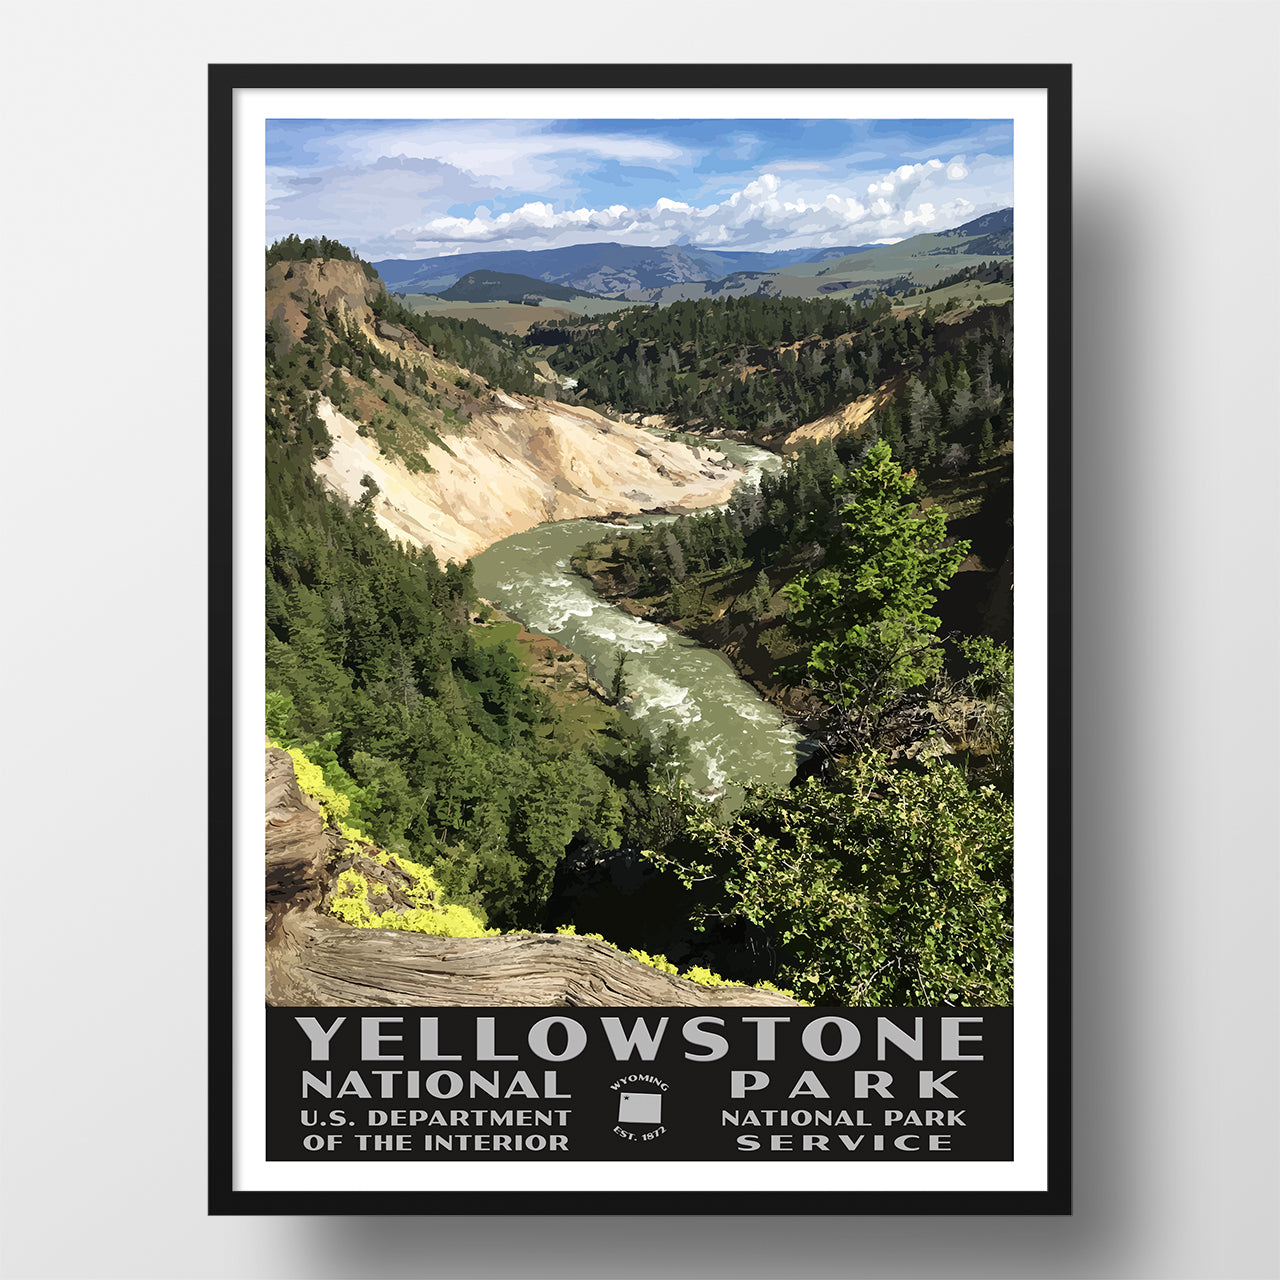 Calcite Springs WPA style poster